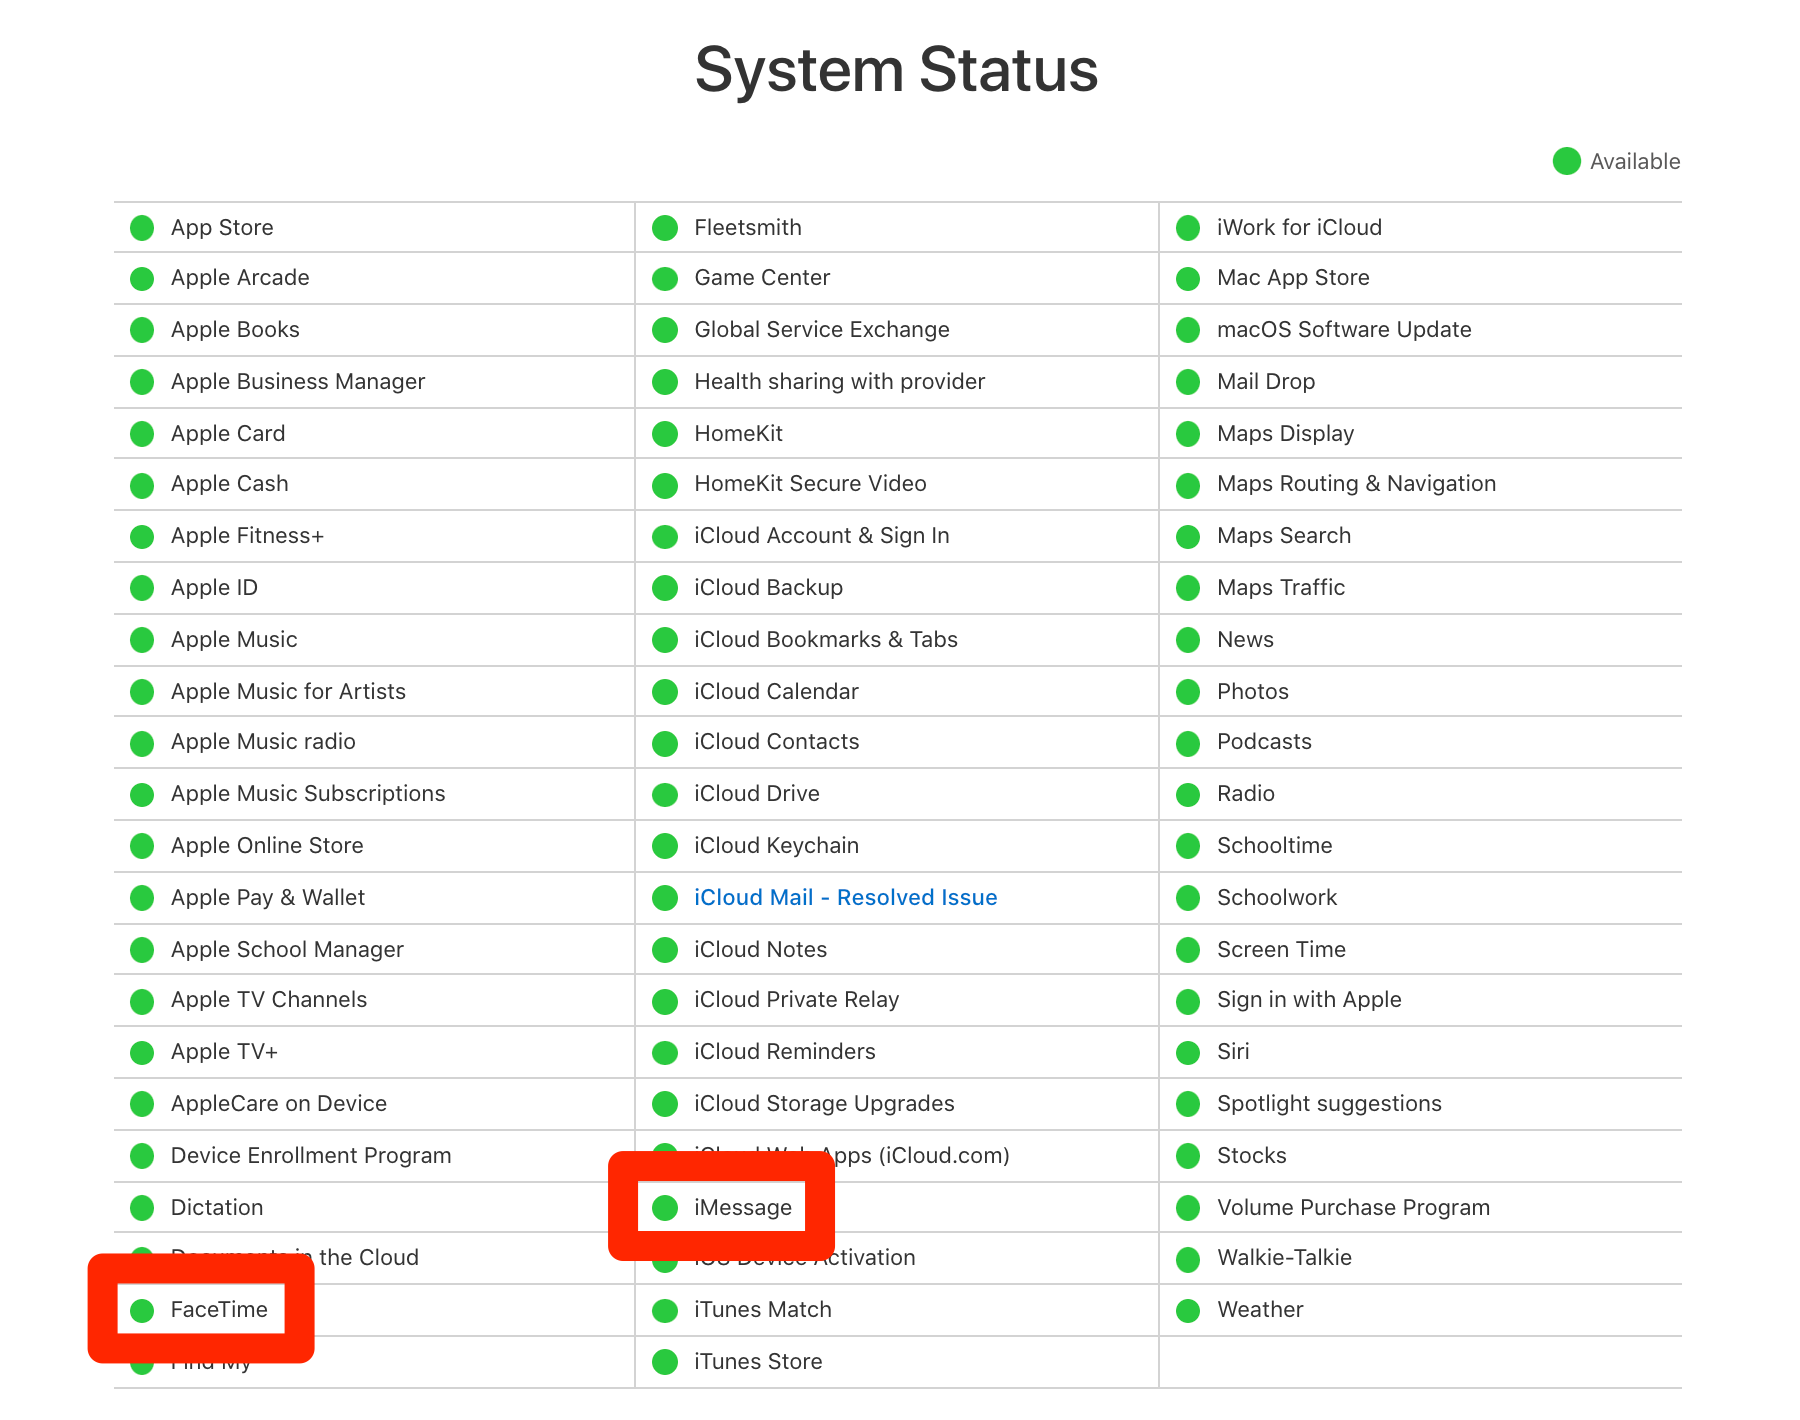 Apple's System Status webpage. The FaceTime and iMessage options are highlighted.